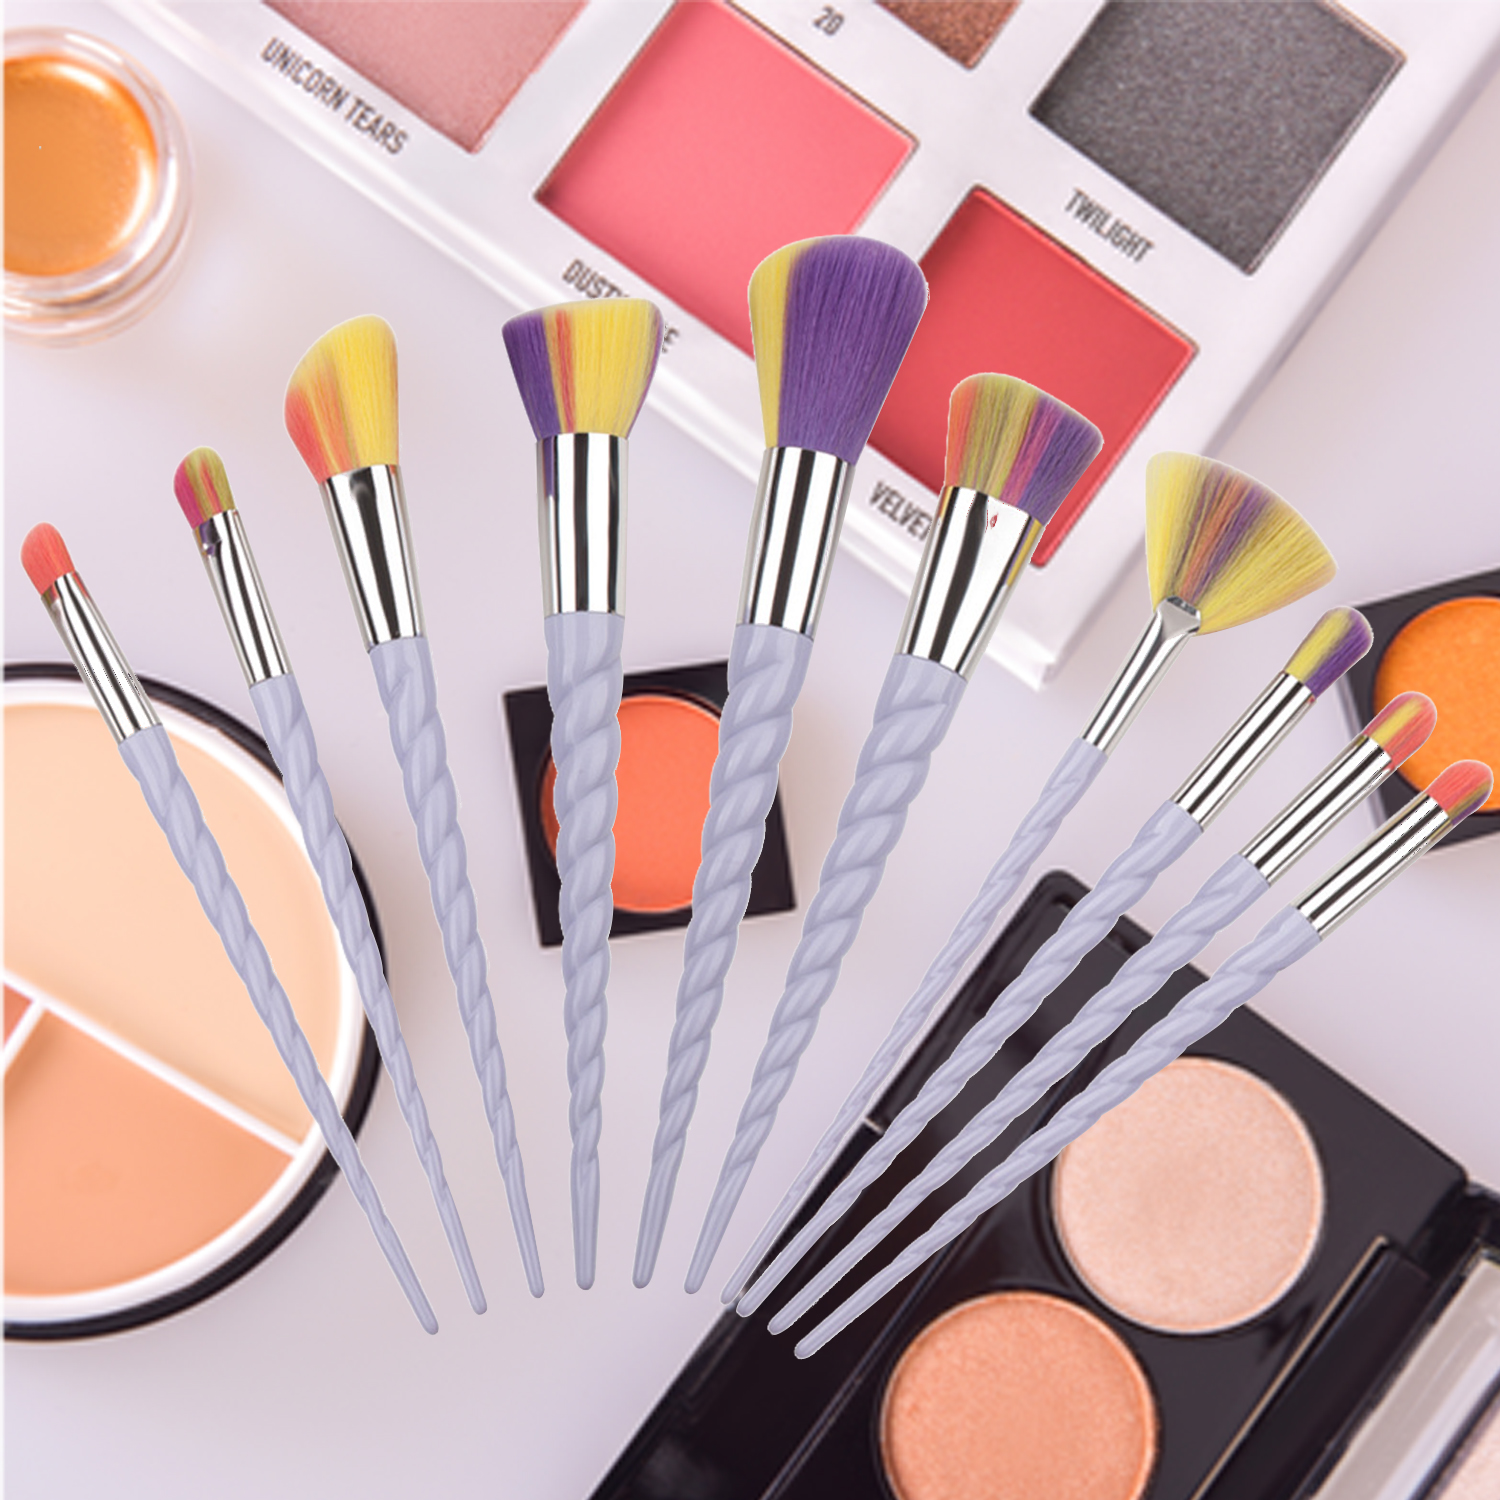 Hot Selling 10 Piece Rainbow Makeup Brush Set High Quality Beautiful Professional Beauty Accessories